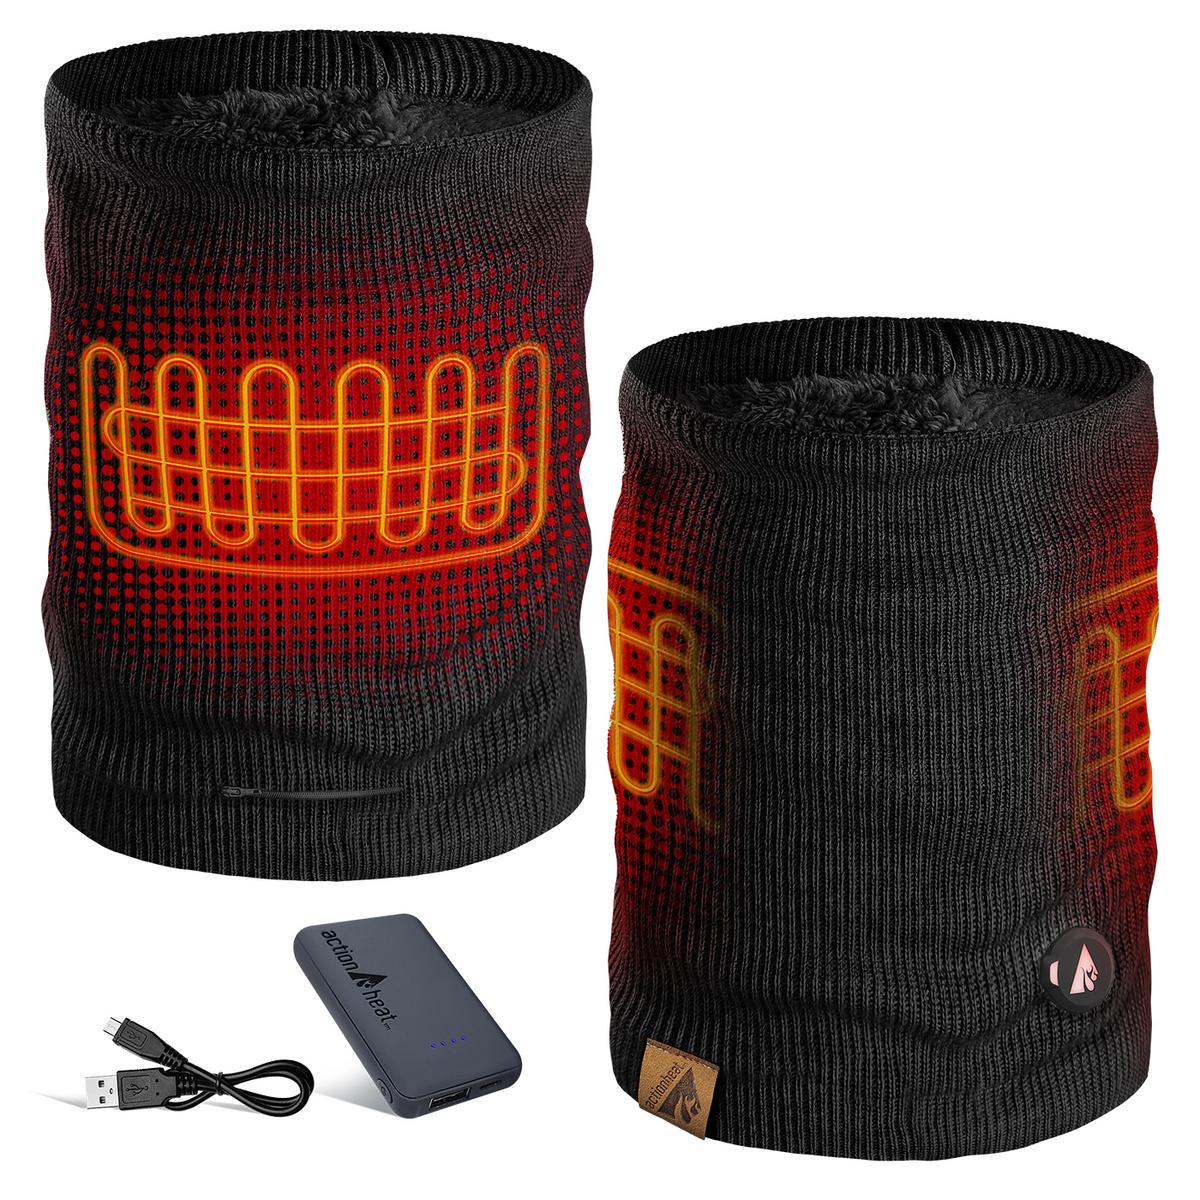 ActionHeat 5V Battery Heated Knit Gaiter - Right